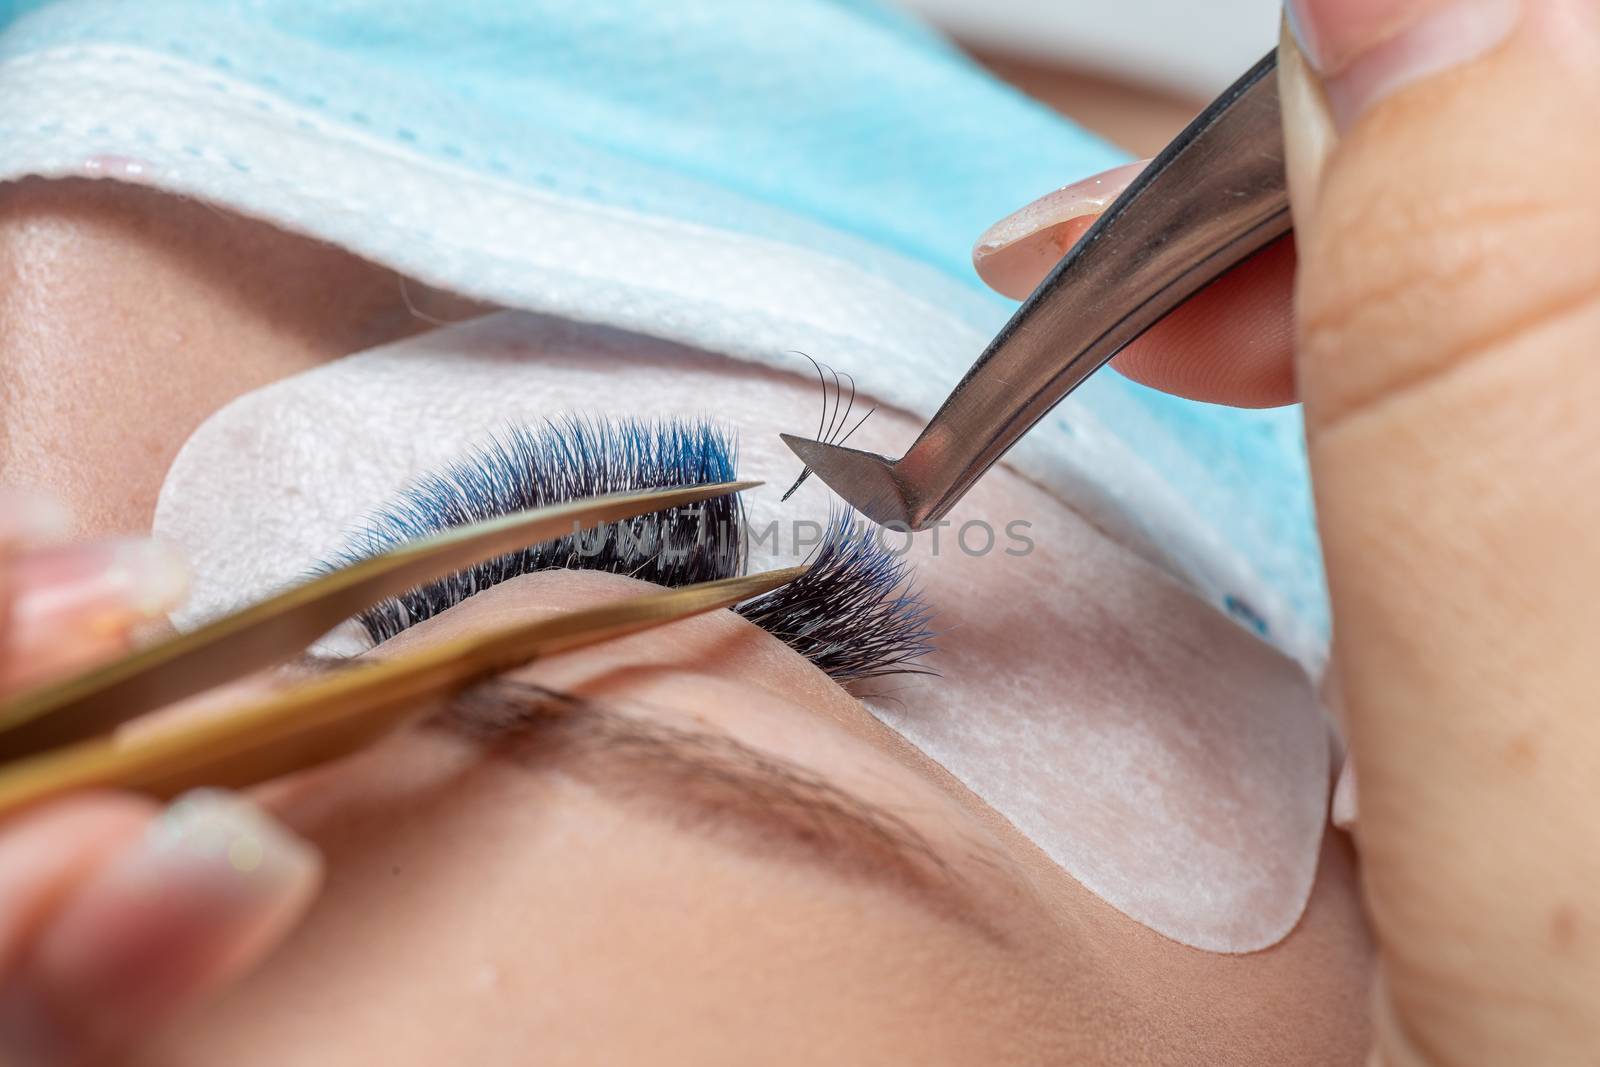 Treatment of Eyelash Extension in blue color Lashes. Eyes with Long Eyelashes and face with facemask